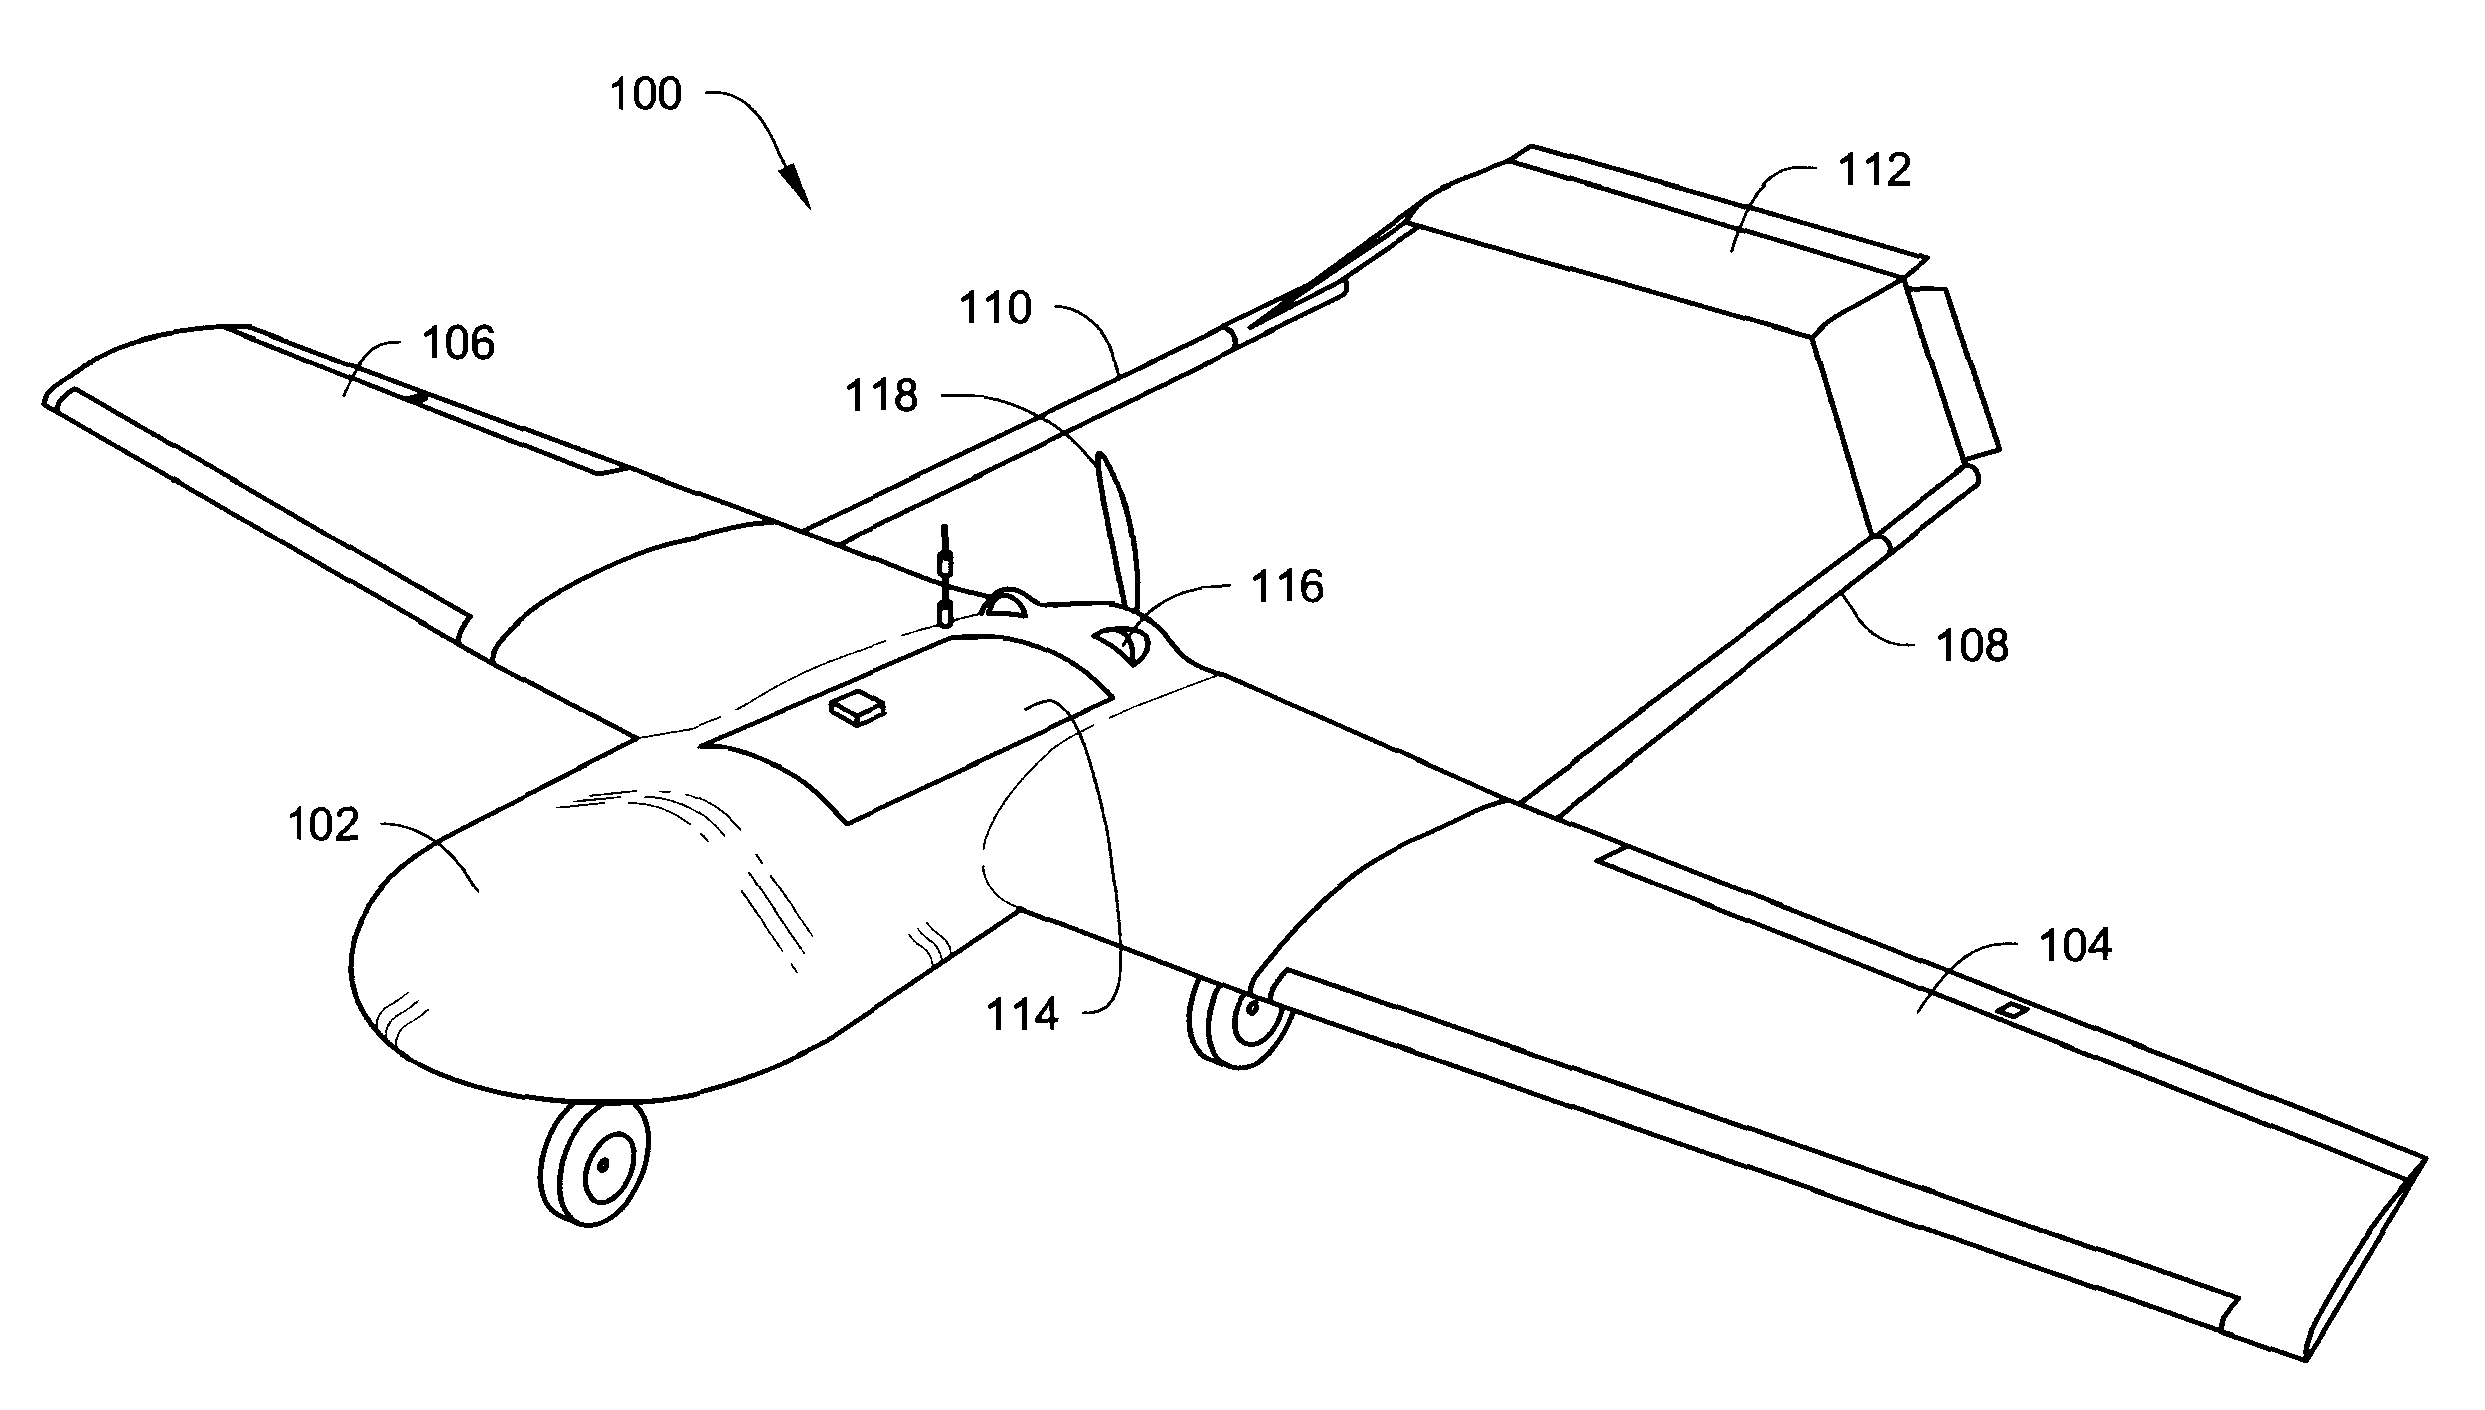 Small unmanned airborne vehicle airframe